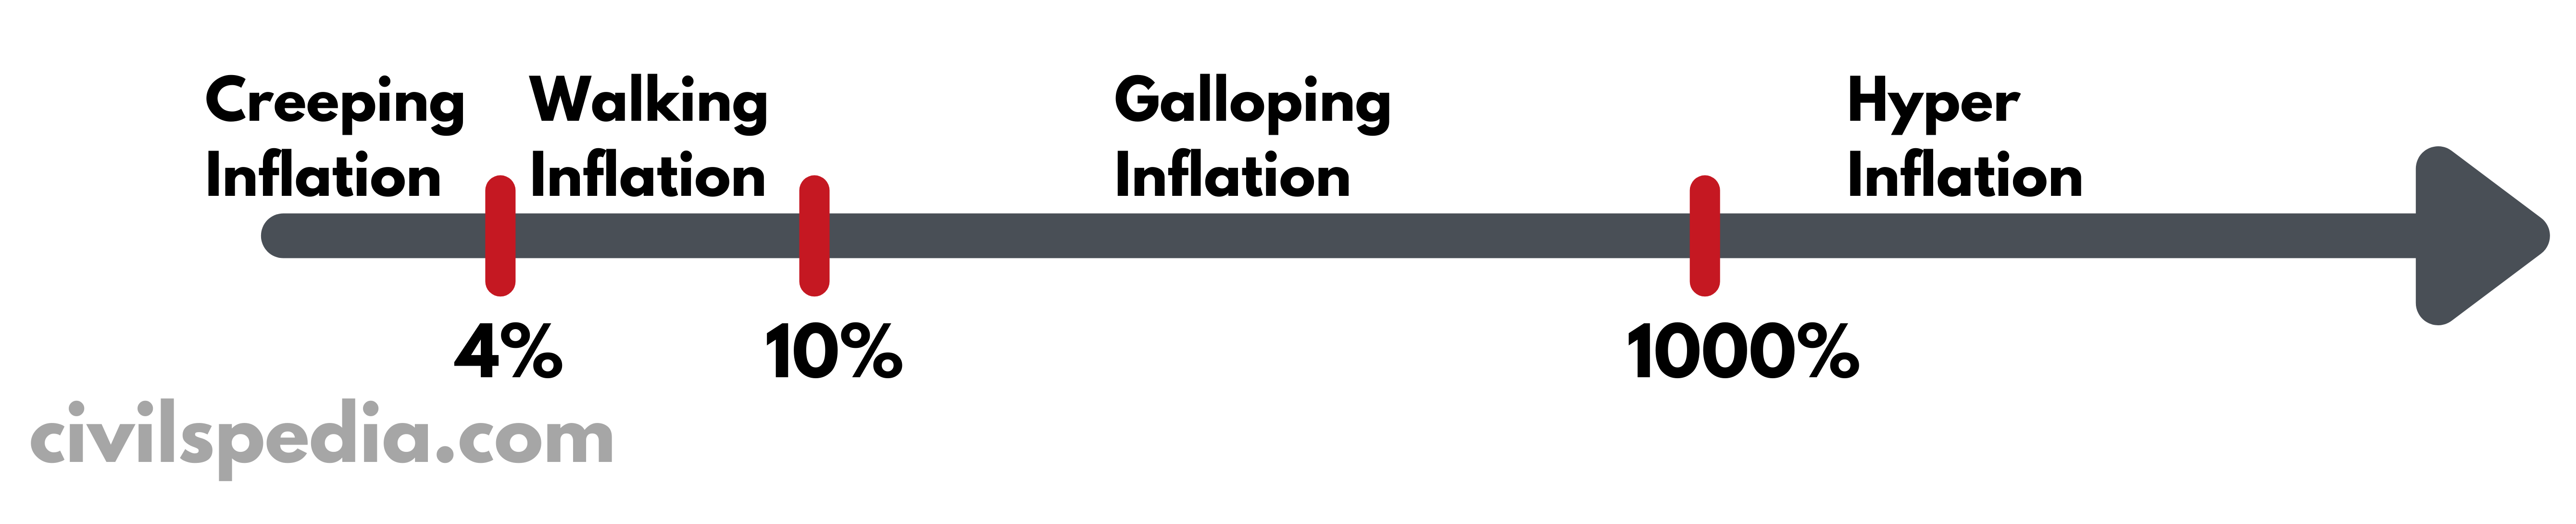 Types of Inflation based on speed 